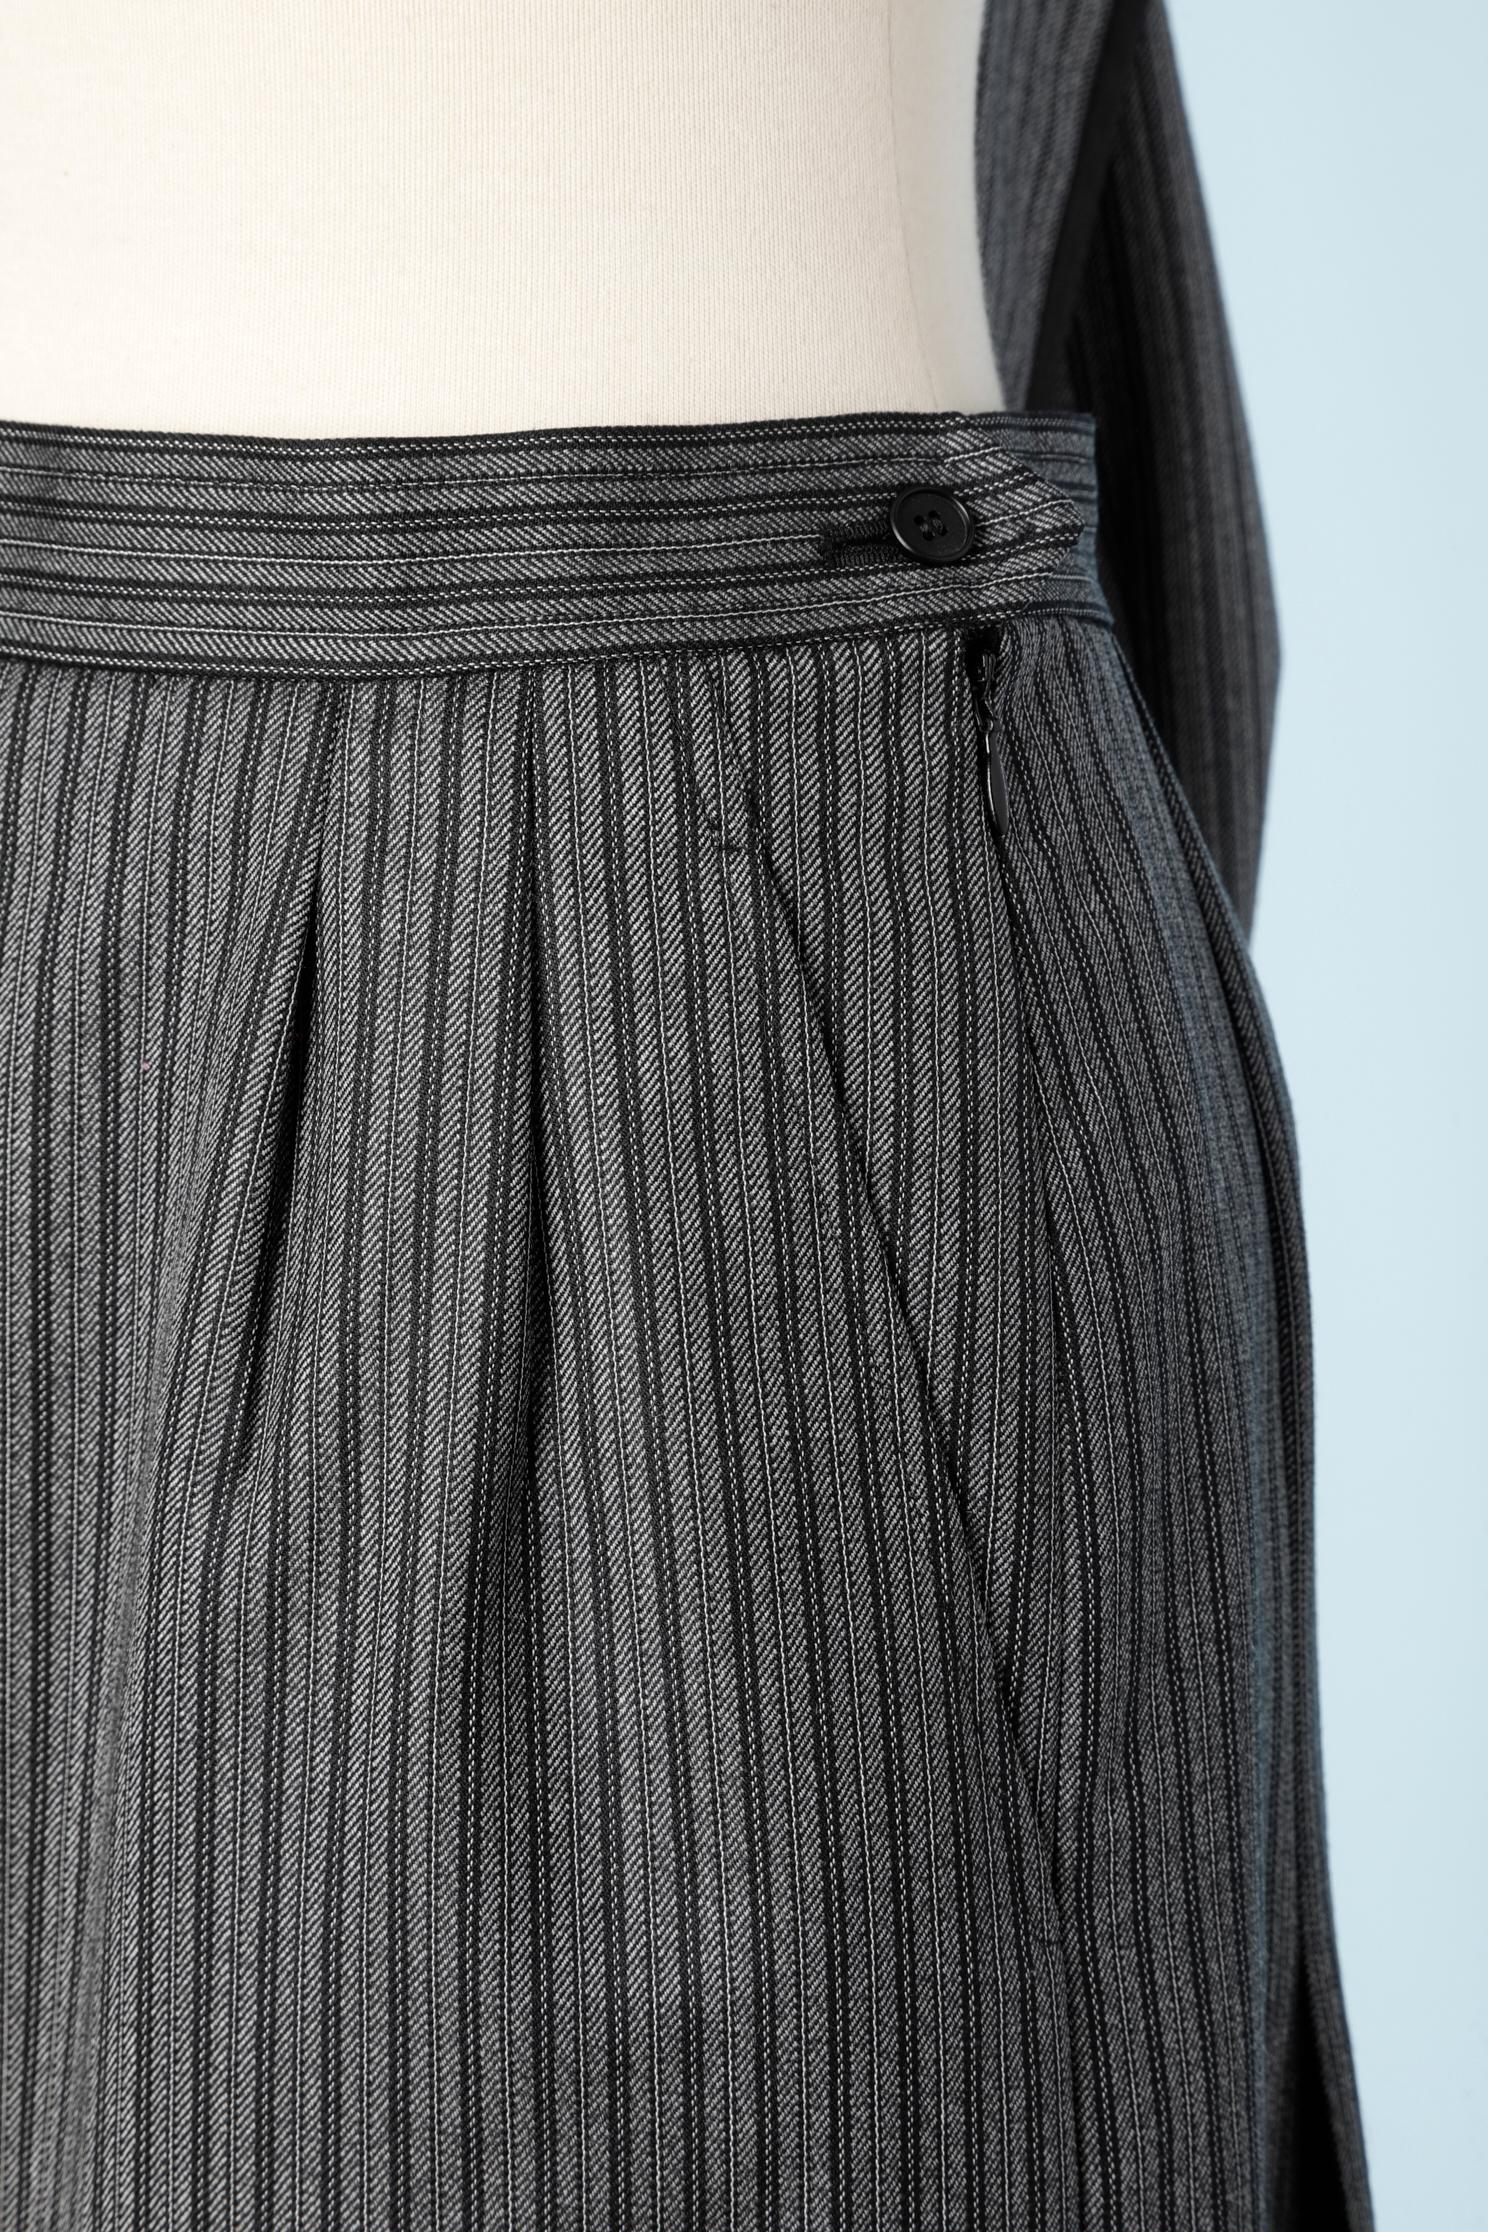 Black and grey wool striped skirt - suit Yves Saint Laurent Rive Gauche  For Sale 2